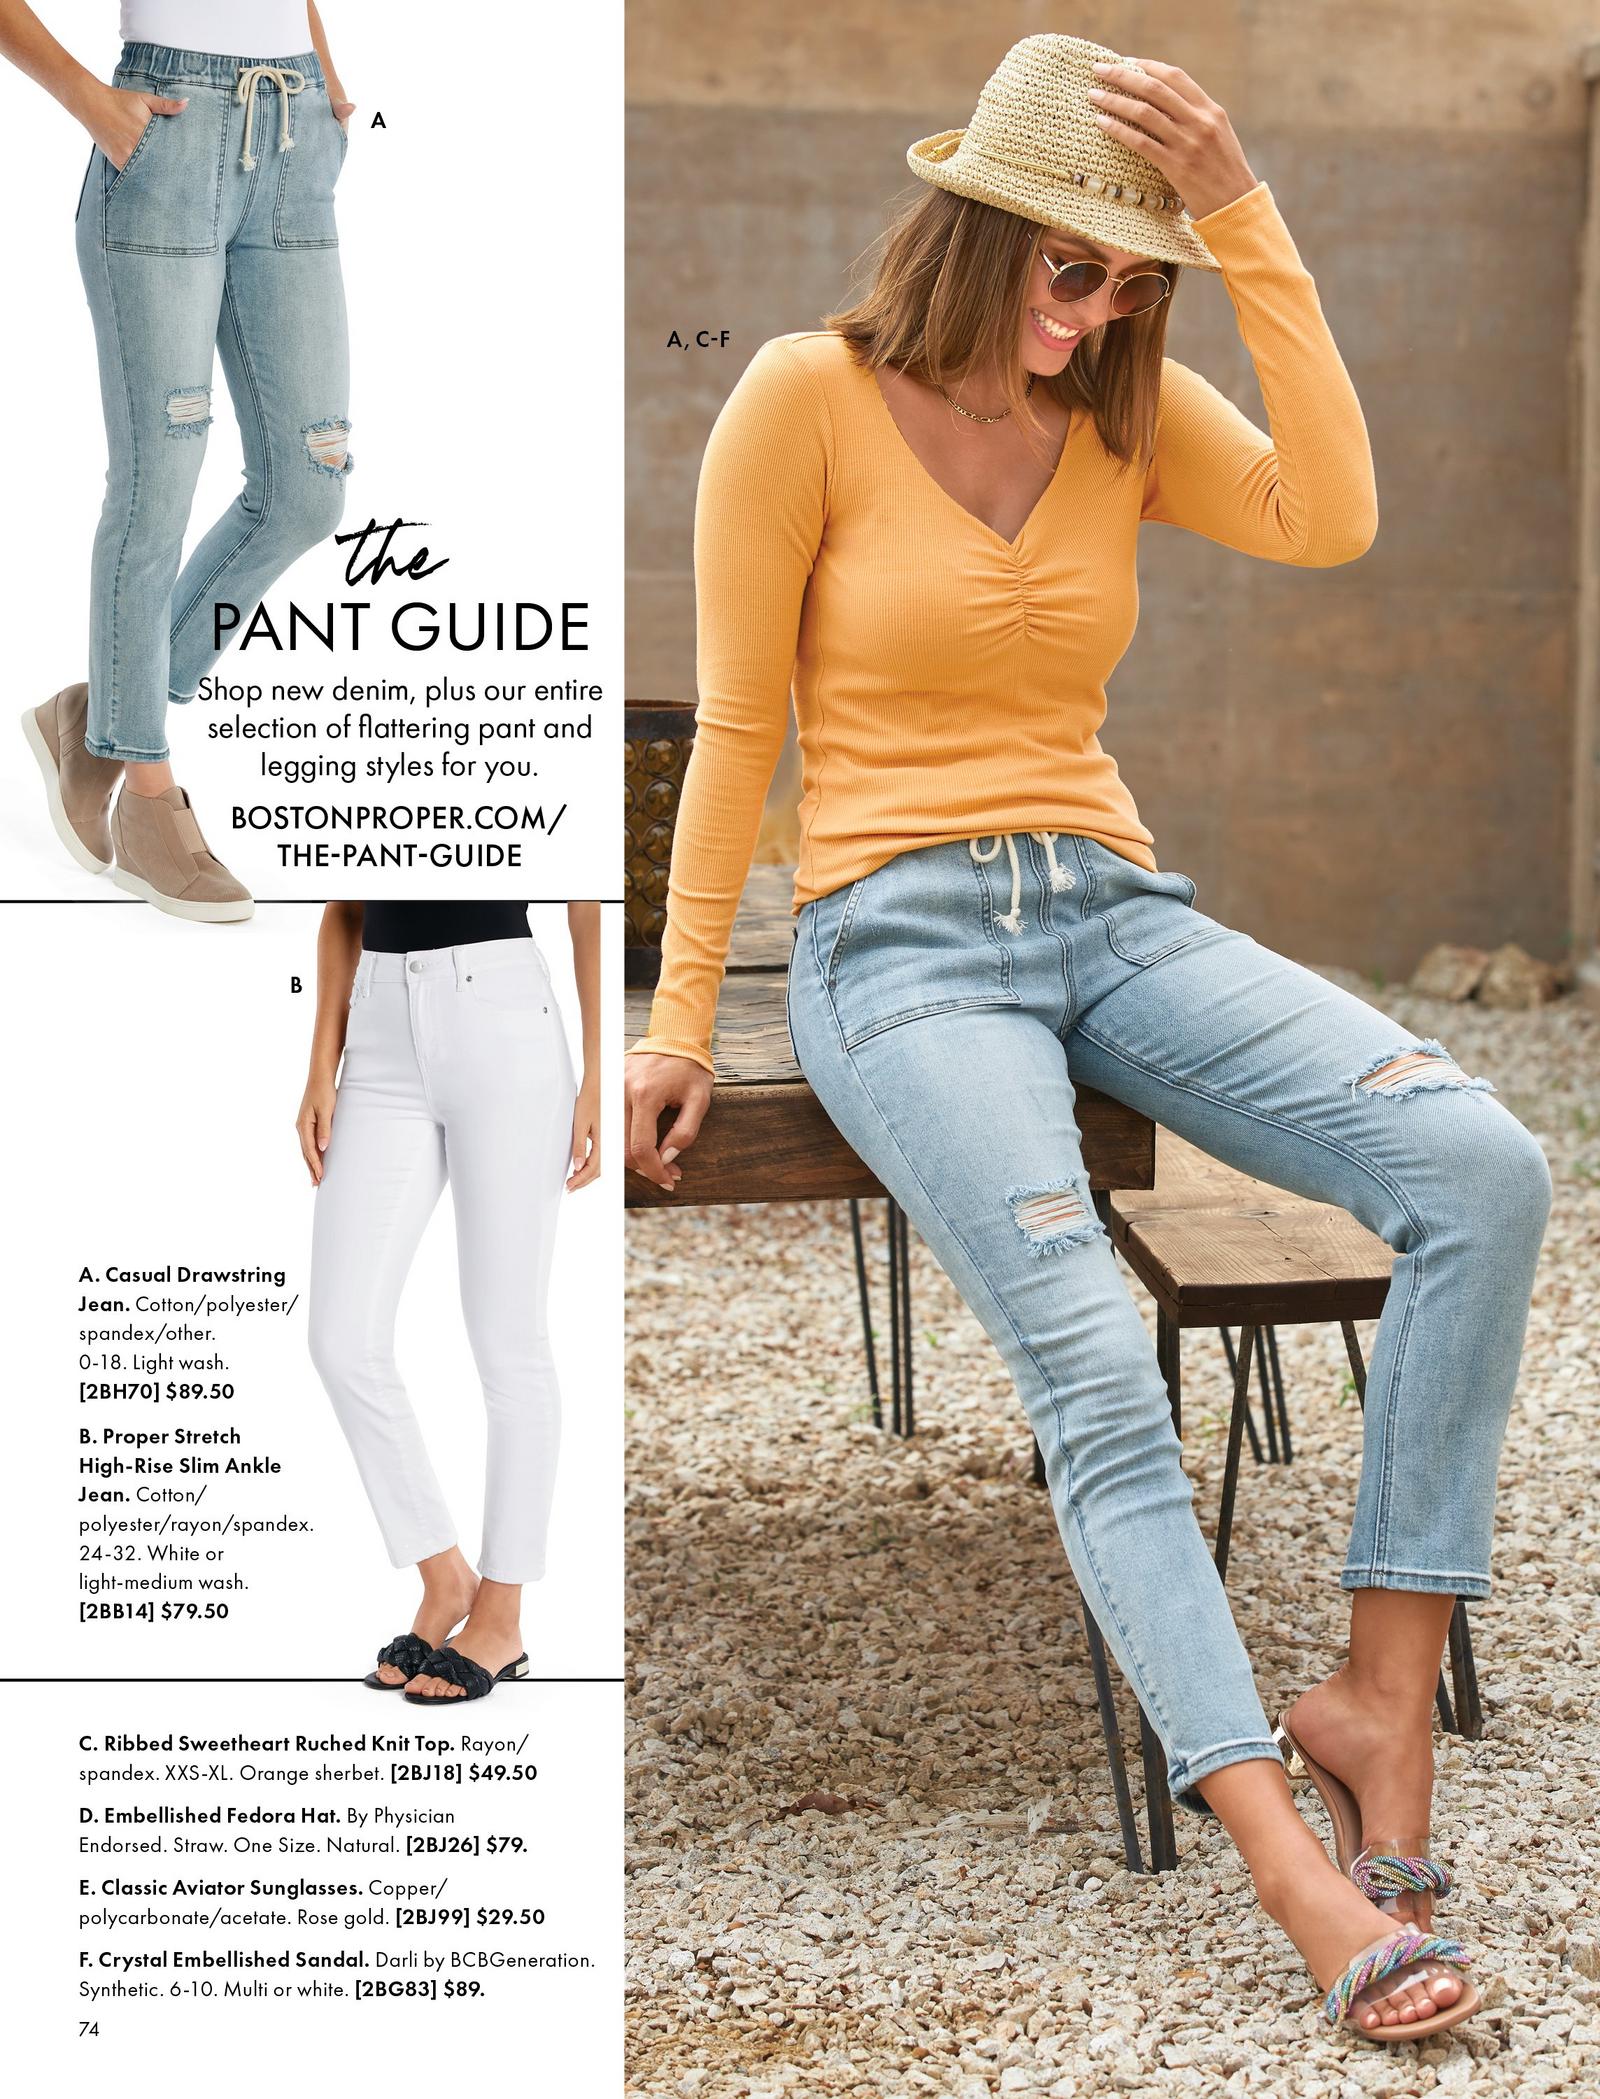 top left model wearing drawstring distressed jeans and taupe sneaker wedges. bottom left model wearing white jeans and black braided slide sandals. right model wearing a yellow ribbed ruched sweetheart top, drawstring distressed jeans, crystal embellished sandals, embellished fedora hat, and aviator sunglasses.